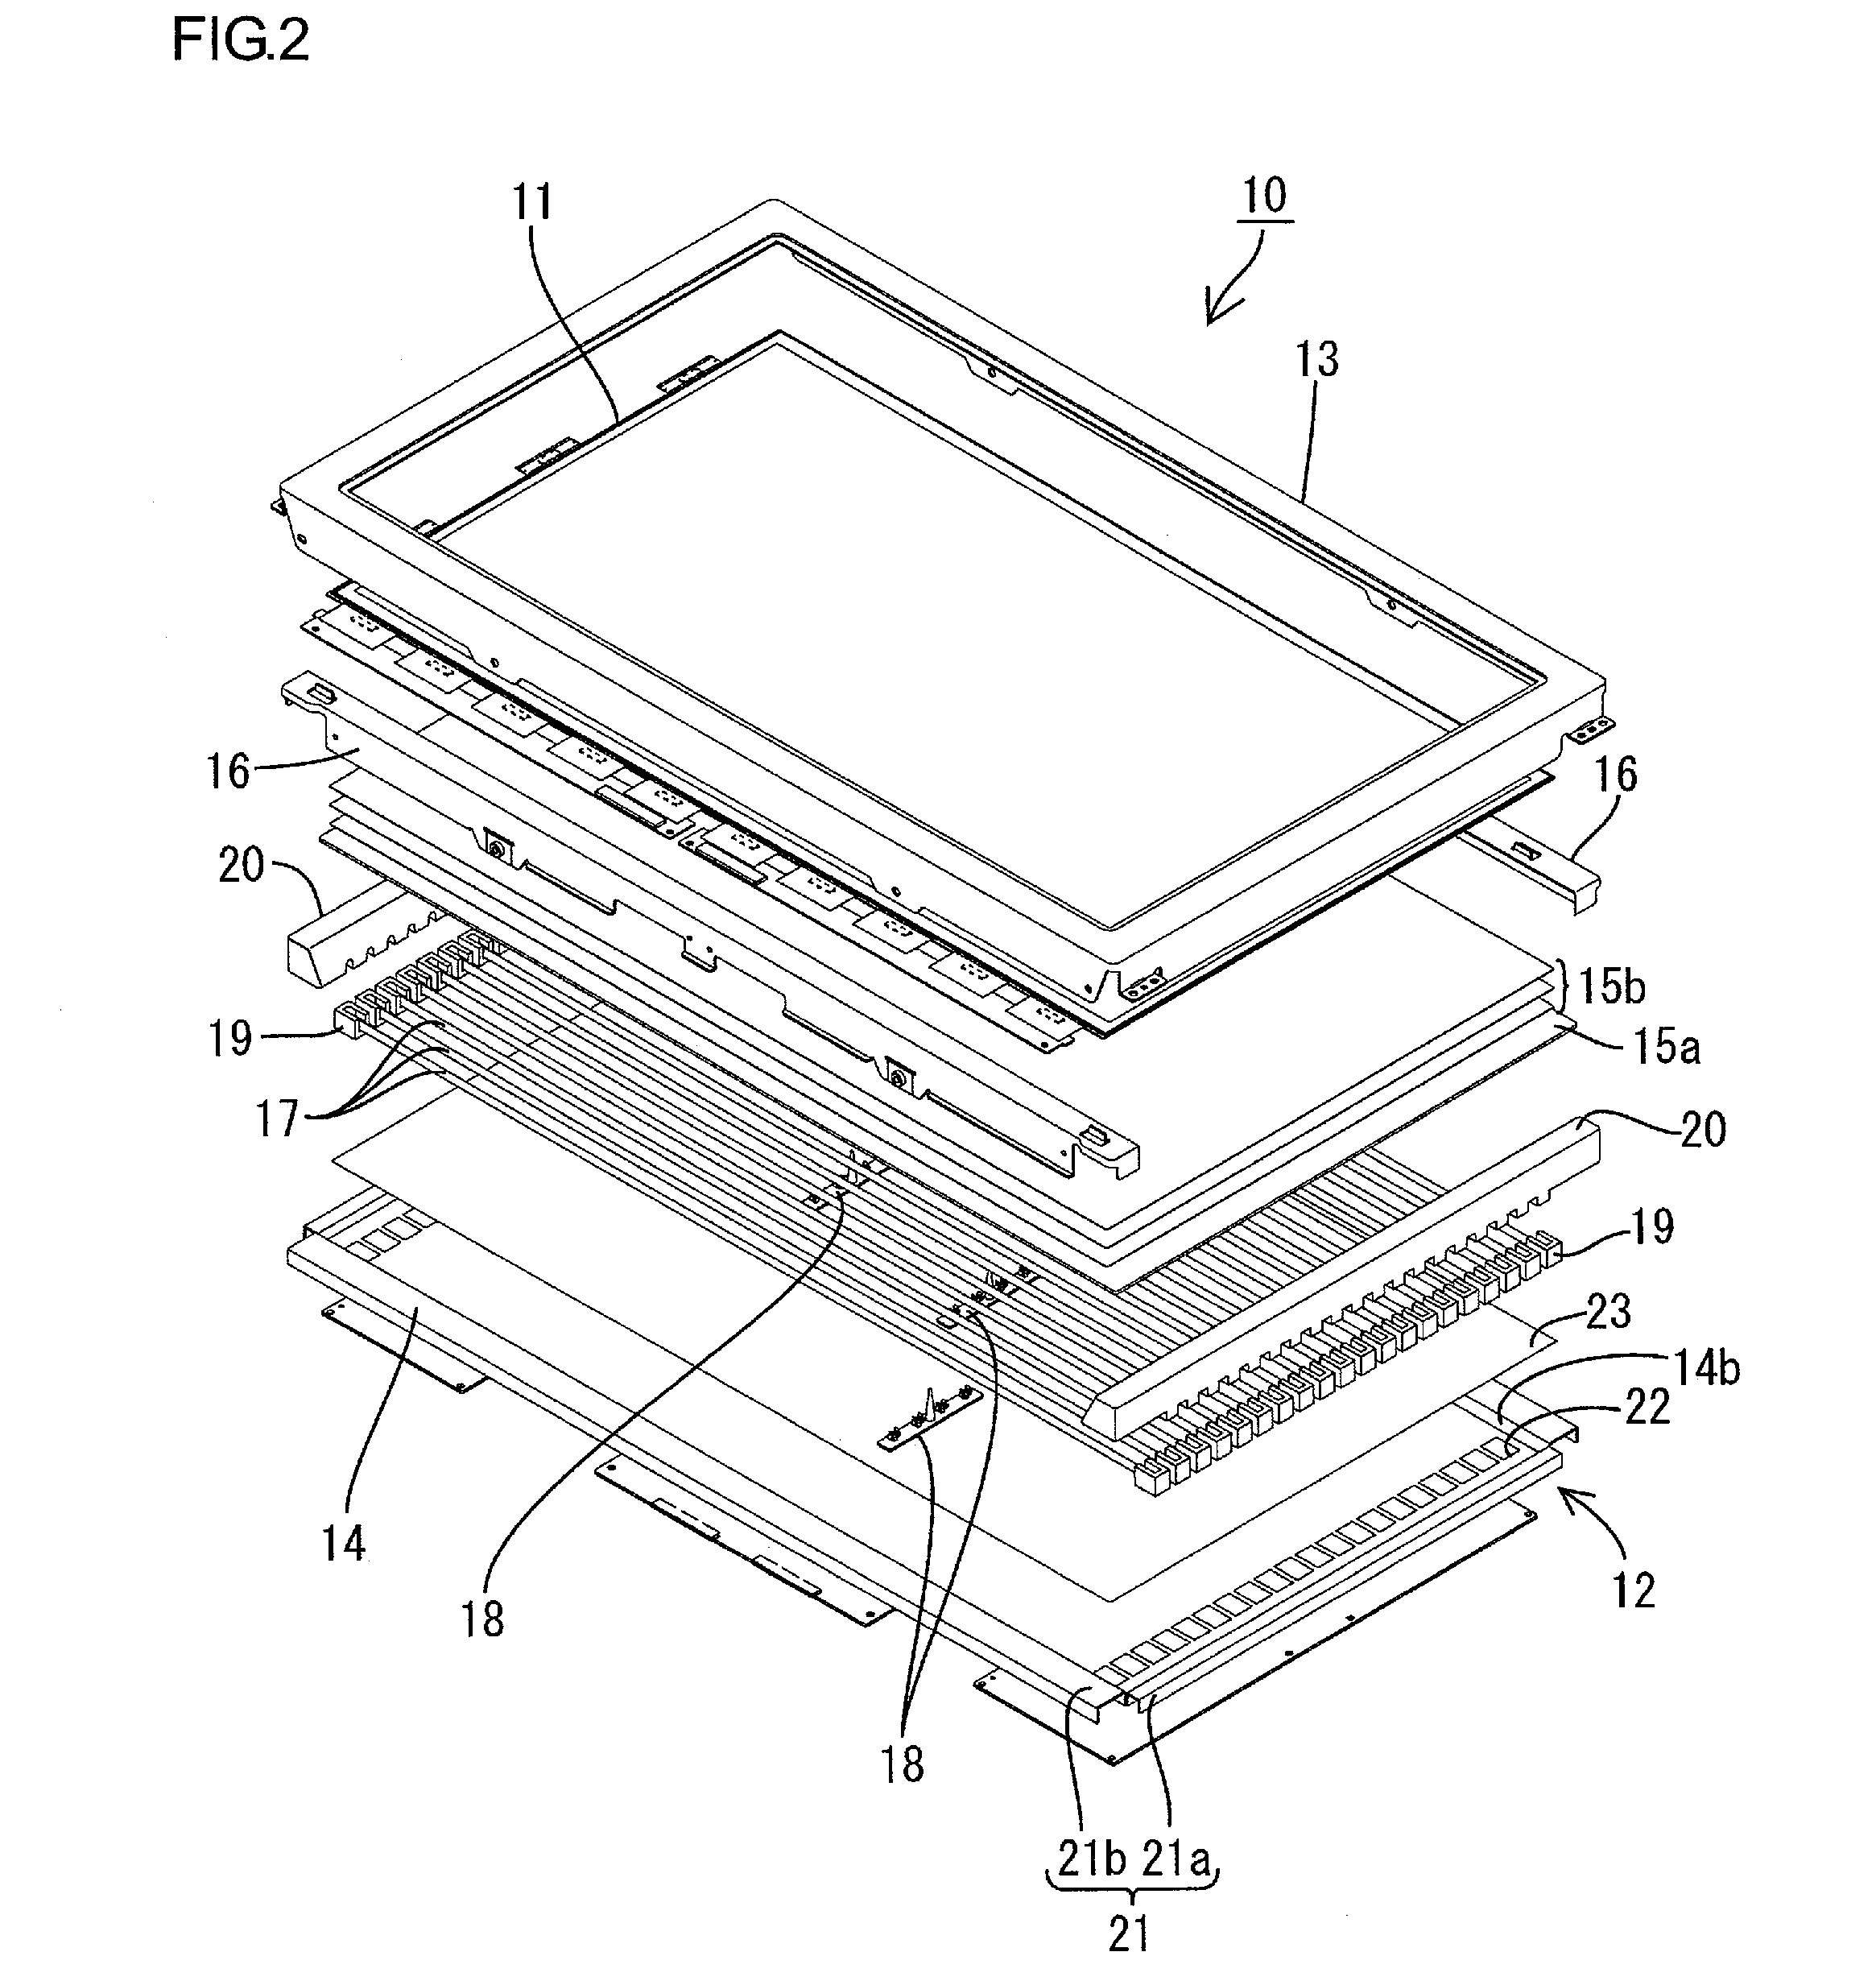 Illumination device, display device, and television receiver apparatus